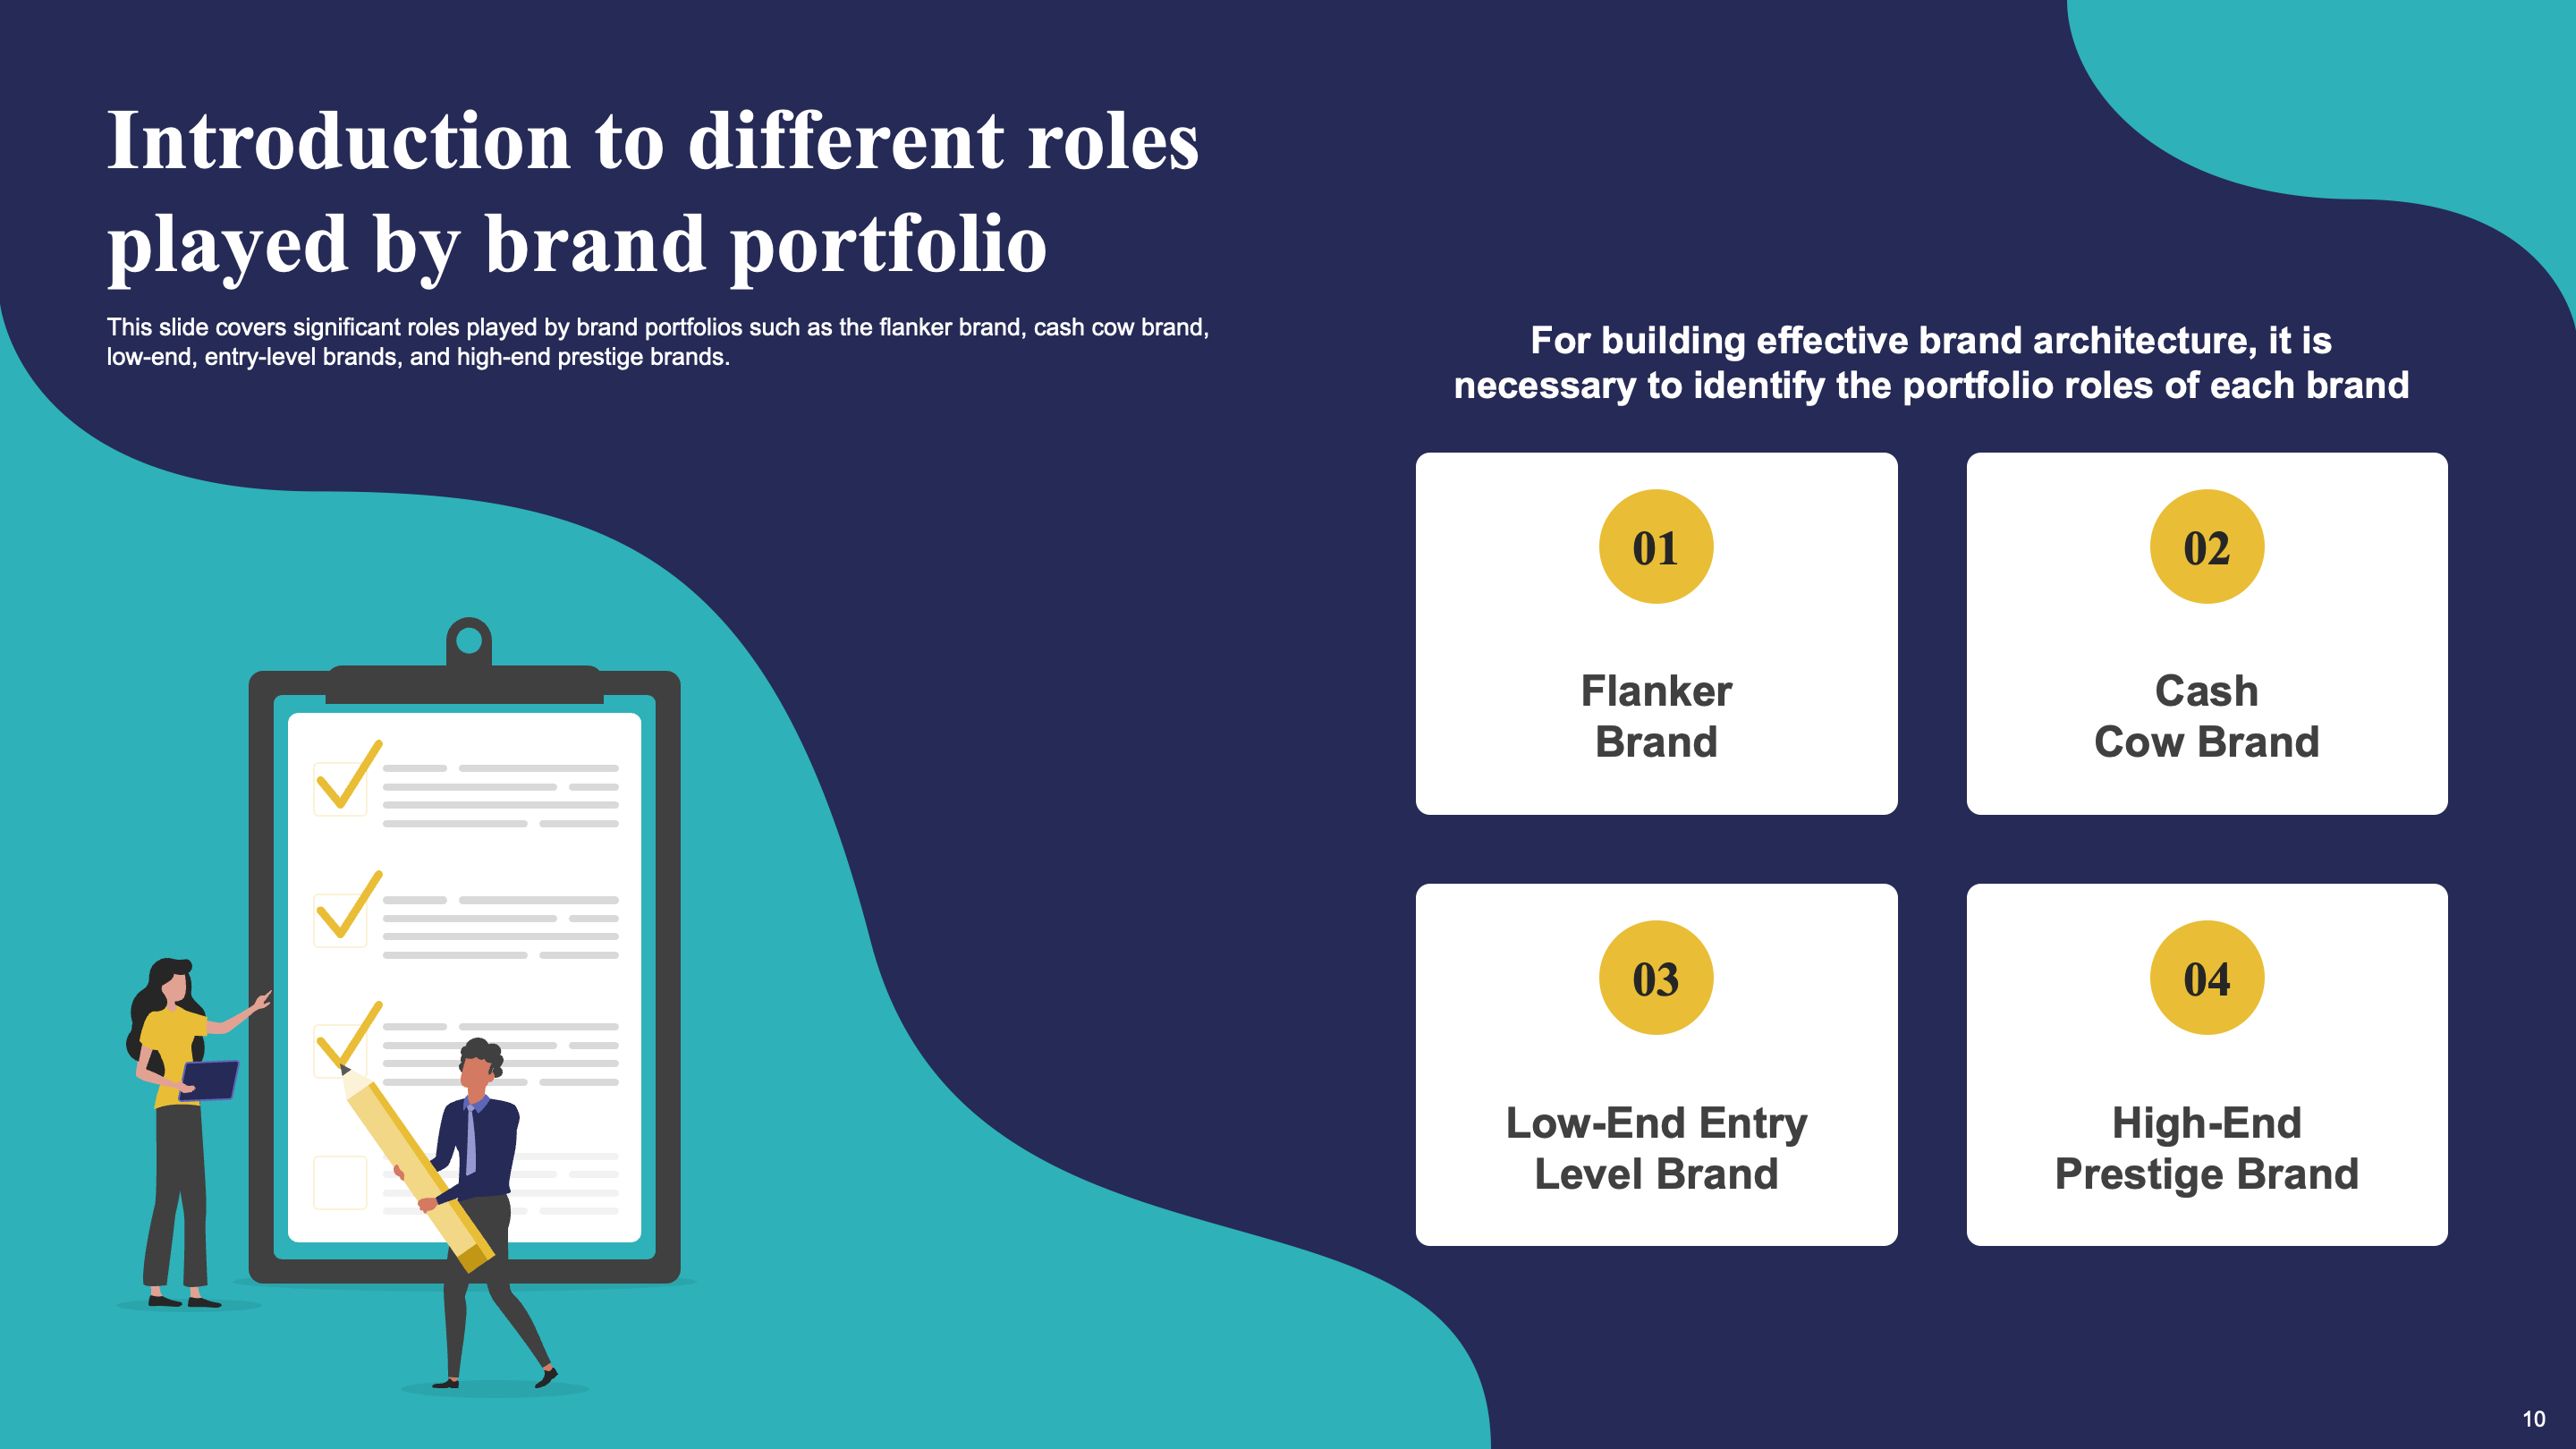 Introduction of different roles played by brand portfolio 